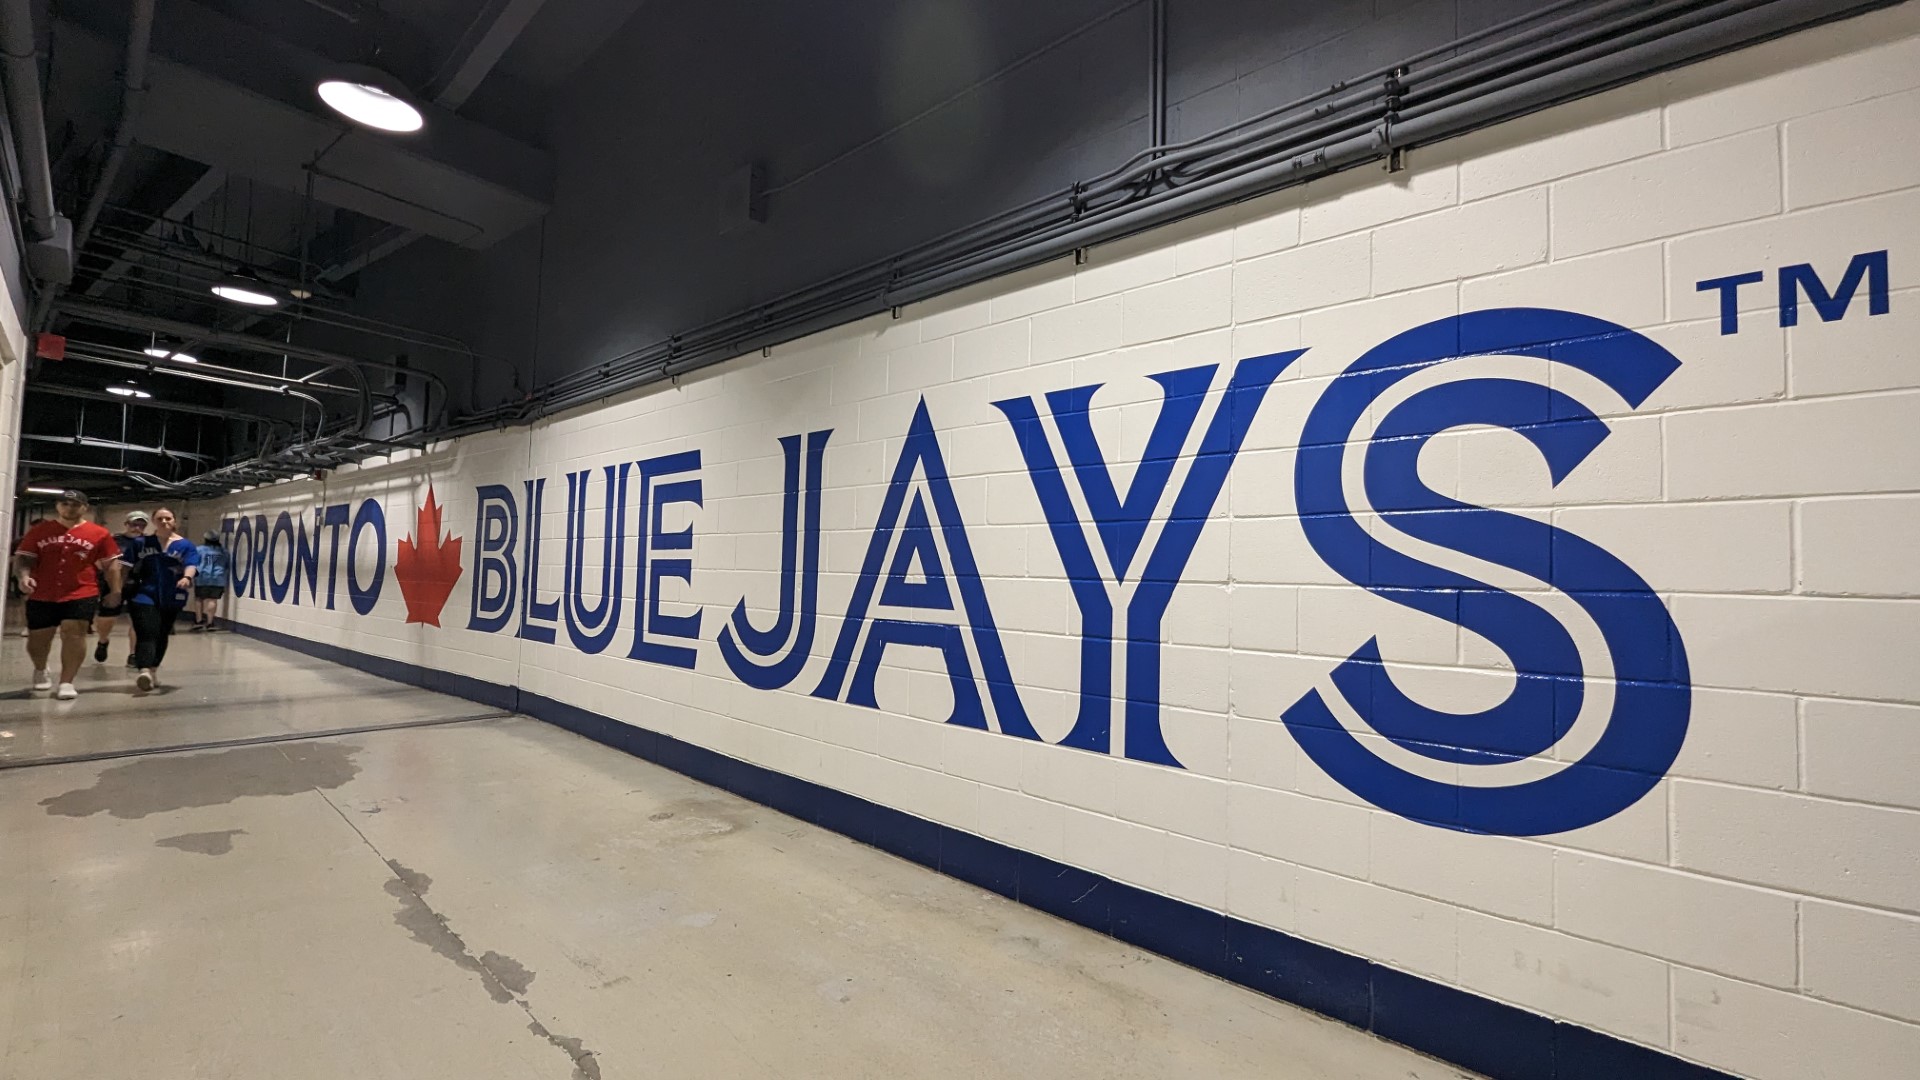 Toronto Blue Jays sign with people